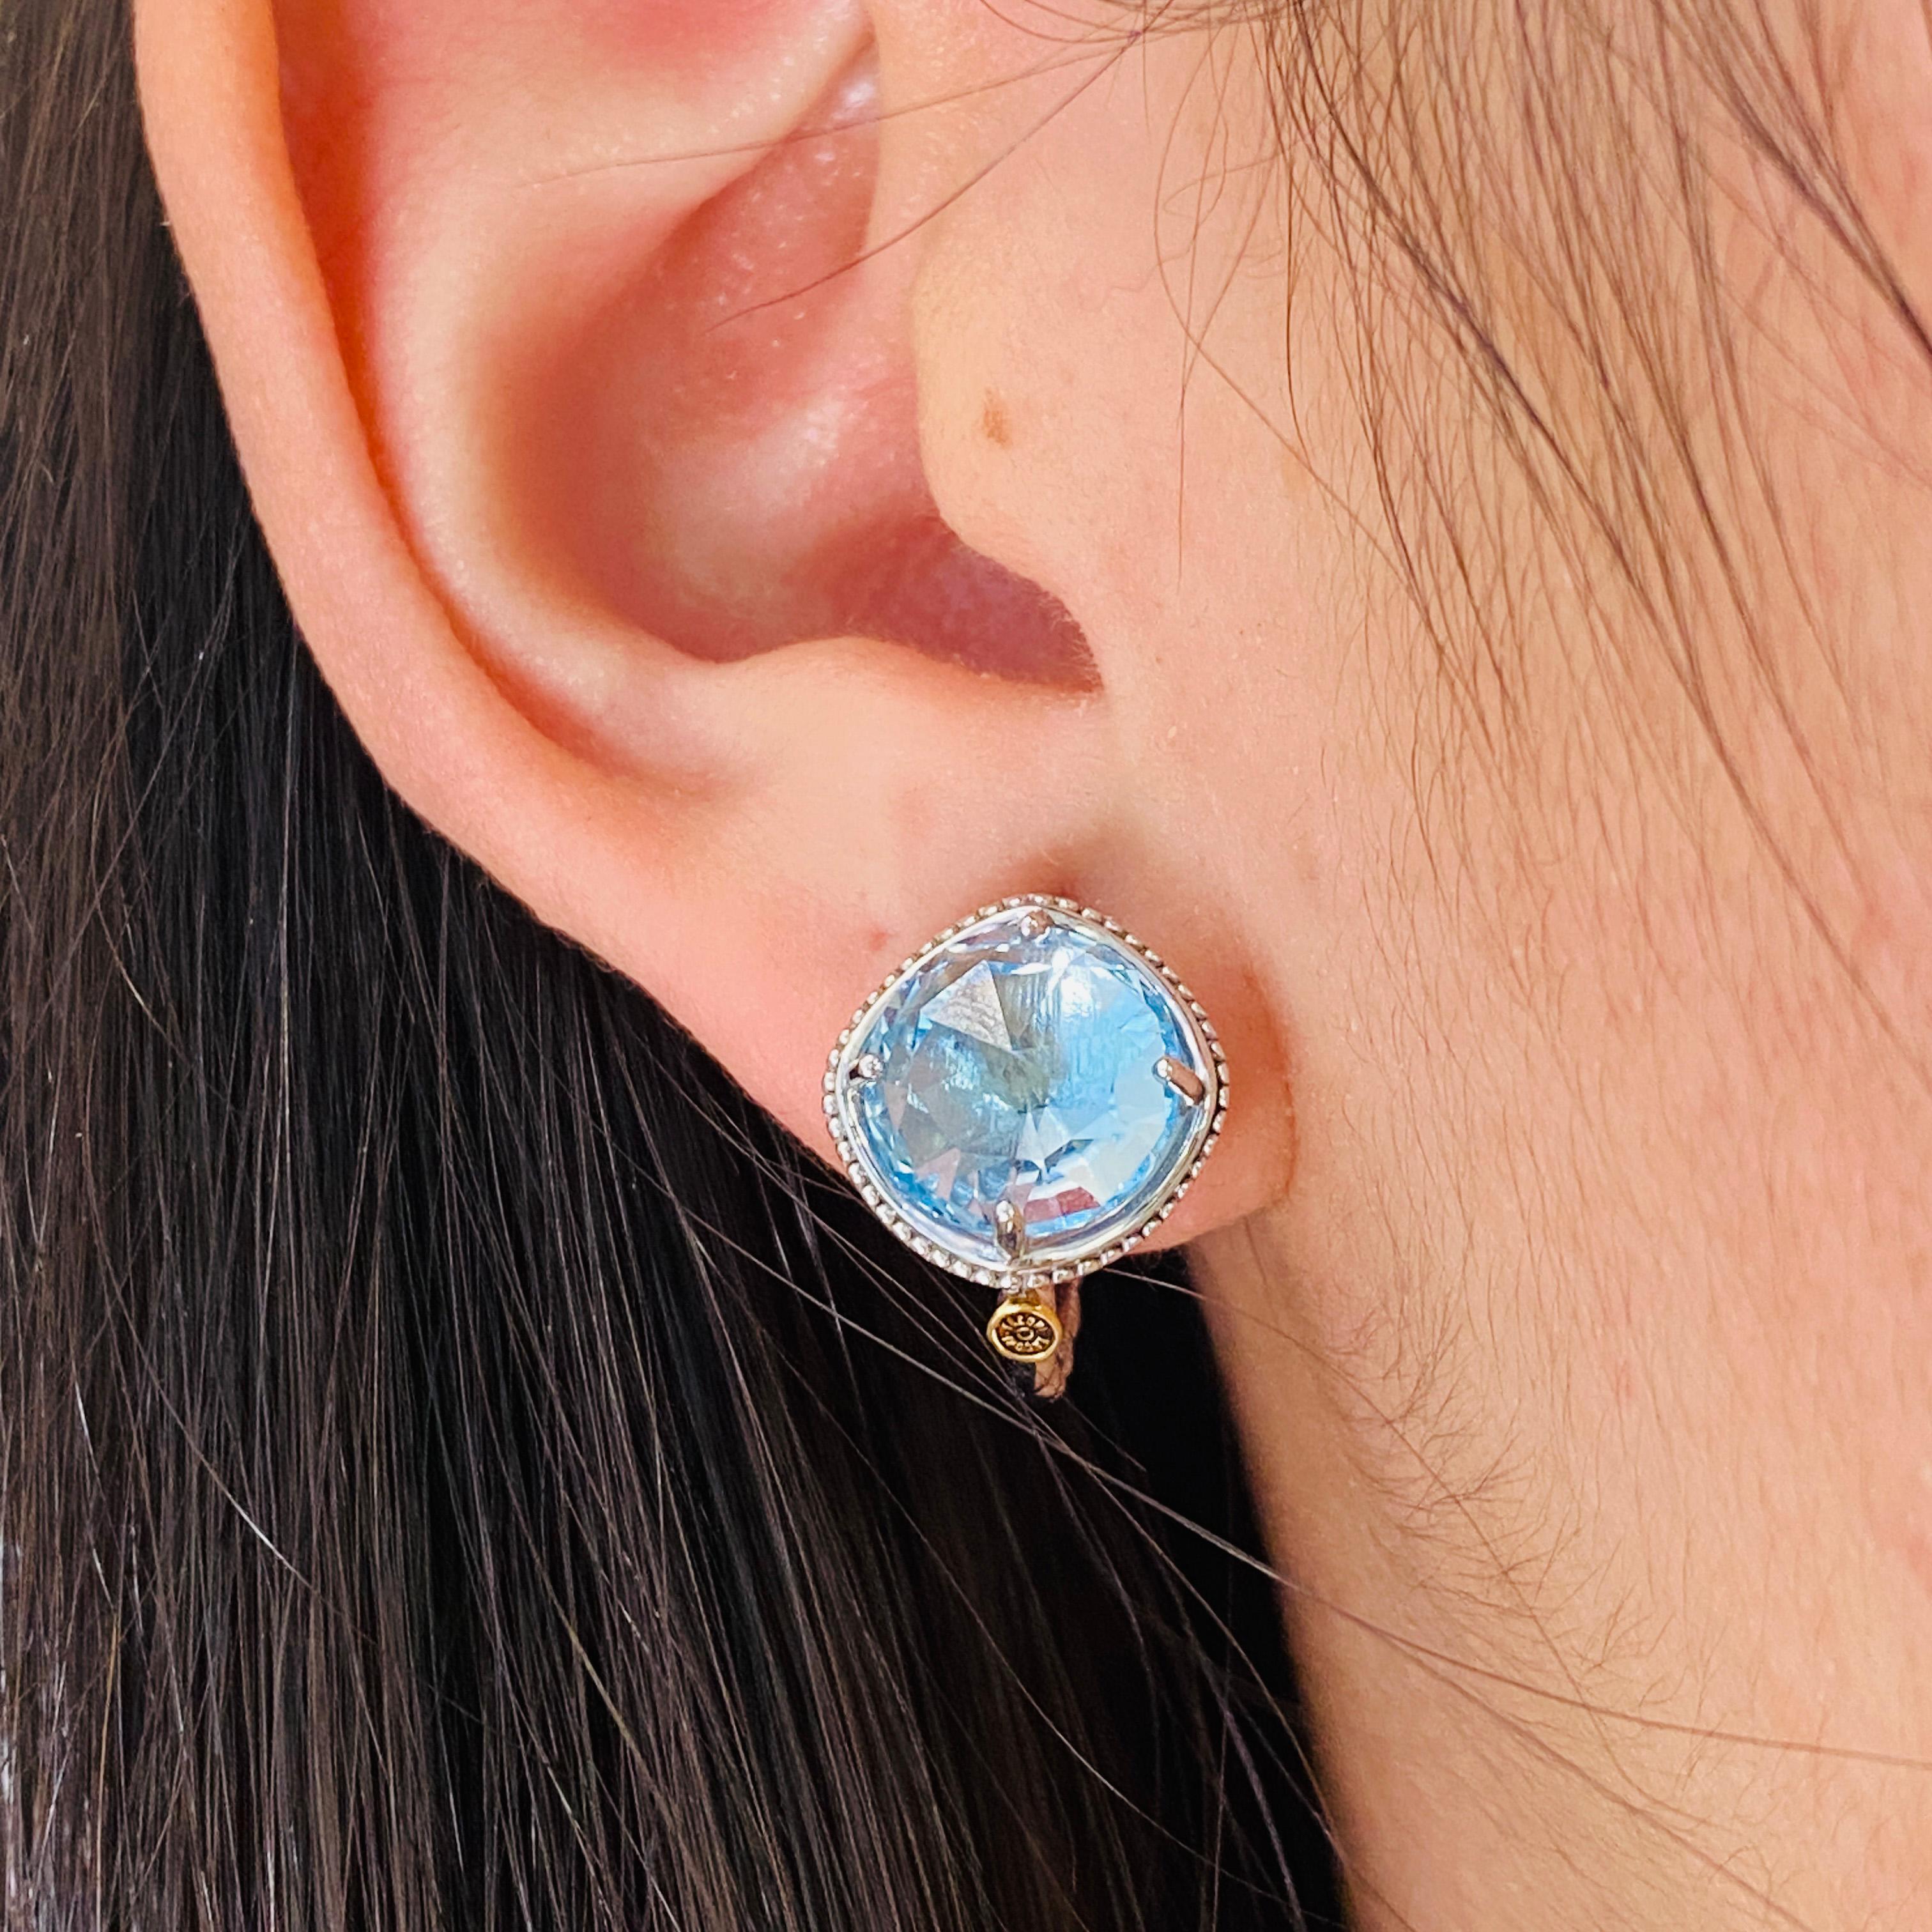 Tacori upholds their styling standards with these bright sky blue topaz hoop earrings! These are great for any dressed up or down occasion! The icy bright topaz is backed and framed by beautifully sweeping sterling silver with a detailed beaded edge